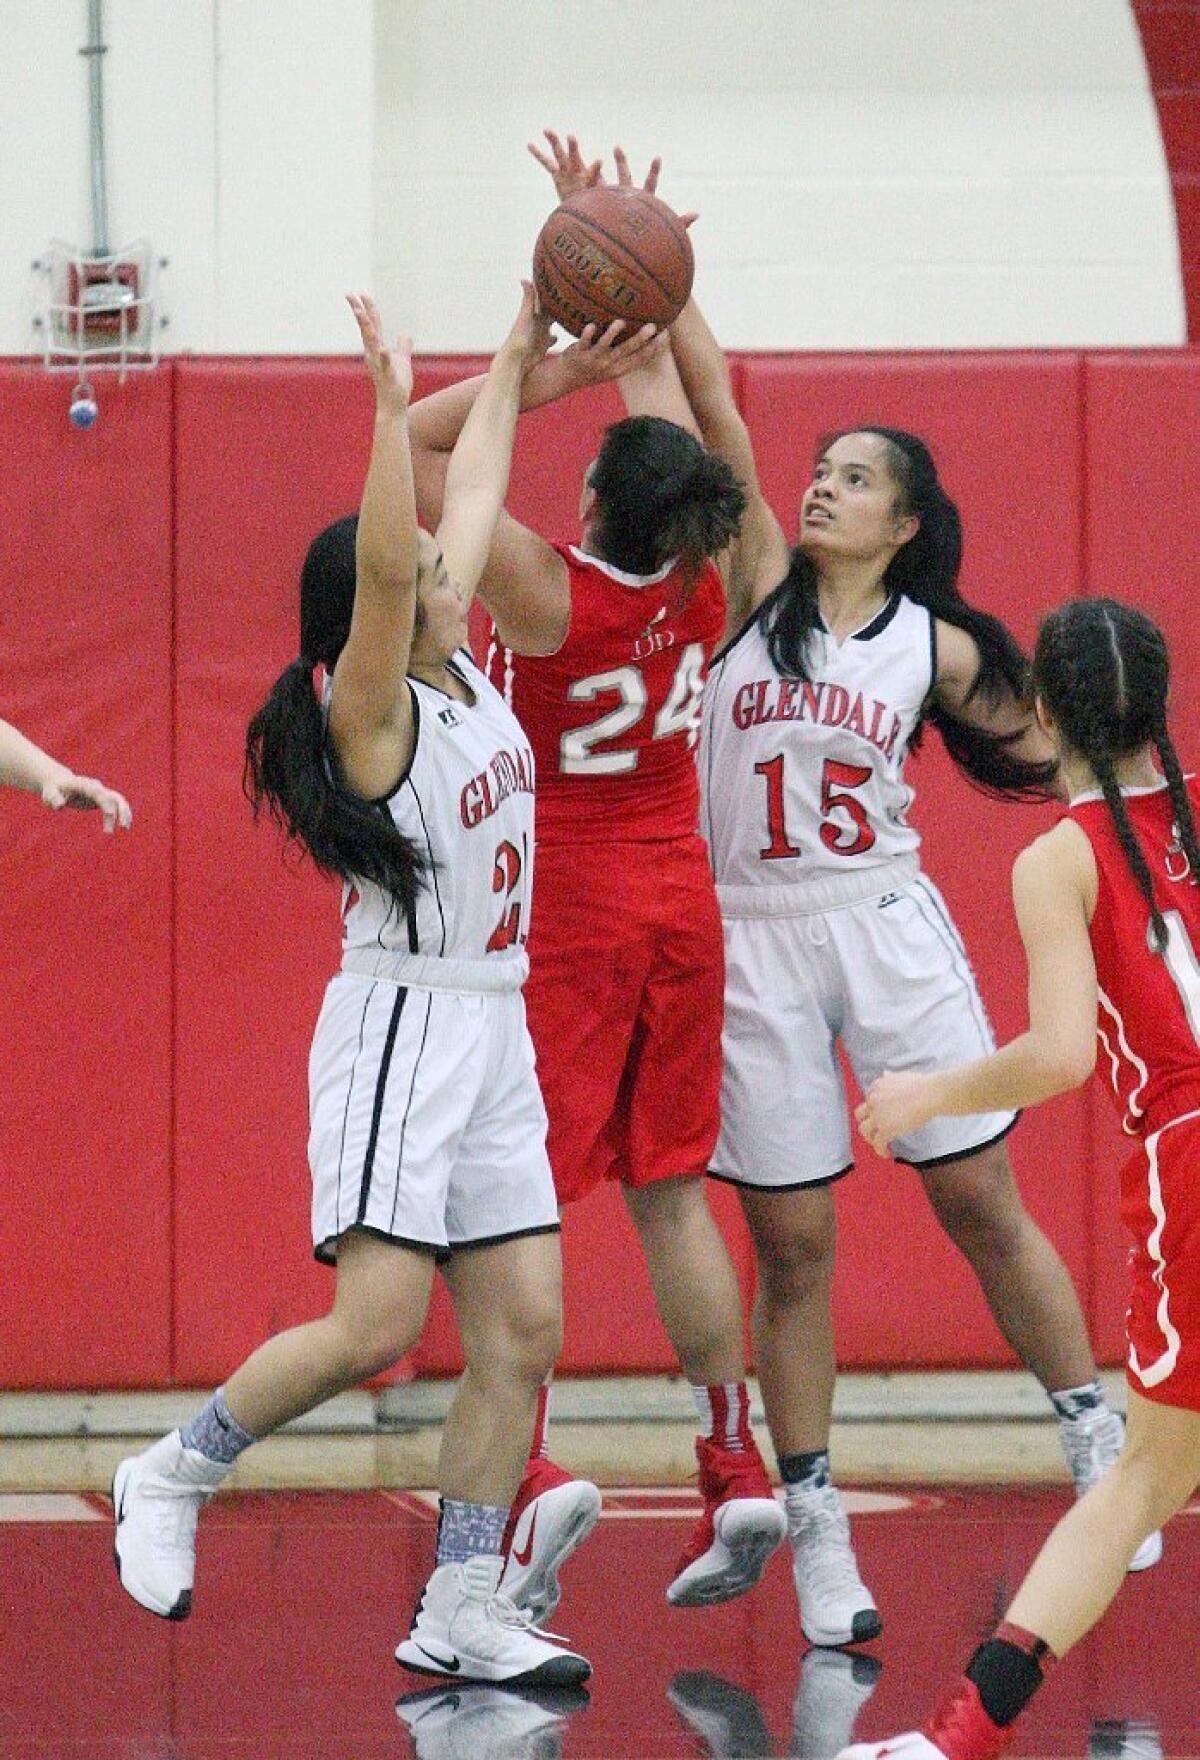 Glendale's girls' basketball team stopped Burroughs and its Pacific League winning streak on Friday night.